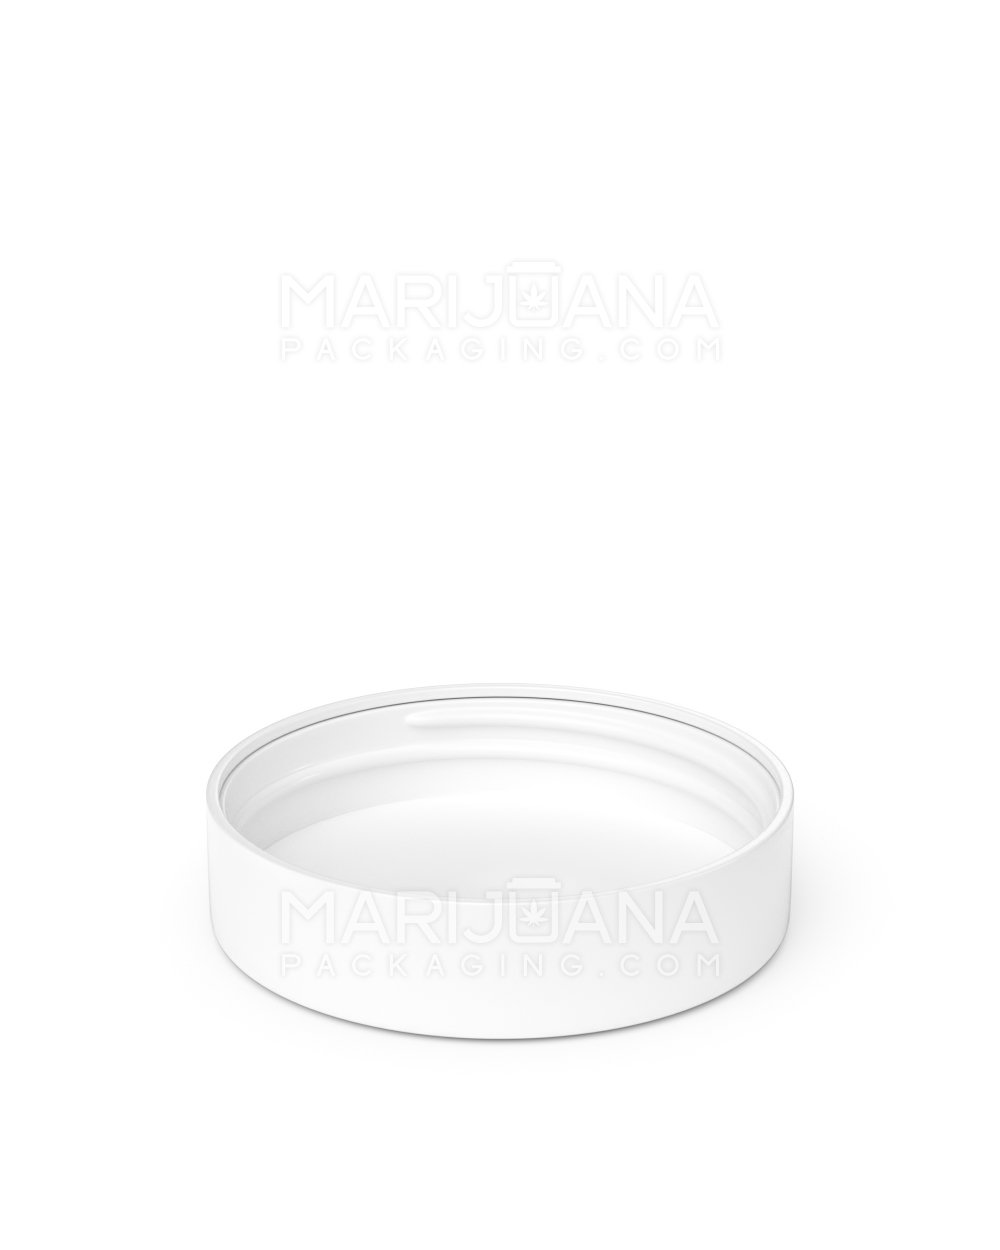 Child Resistant | Smooth Push Down & Turn Plastic Caps w/ Foam Liner | 57mm - Semi Gloss White - 72 Count - 4